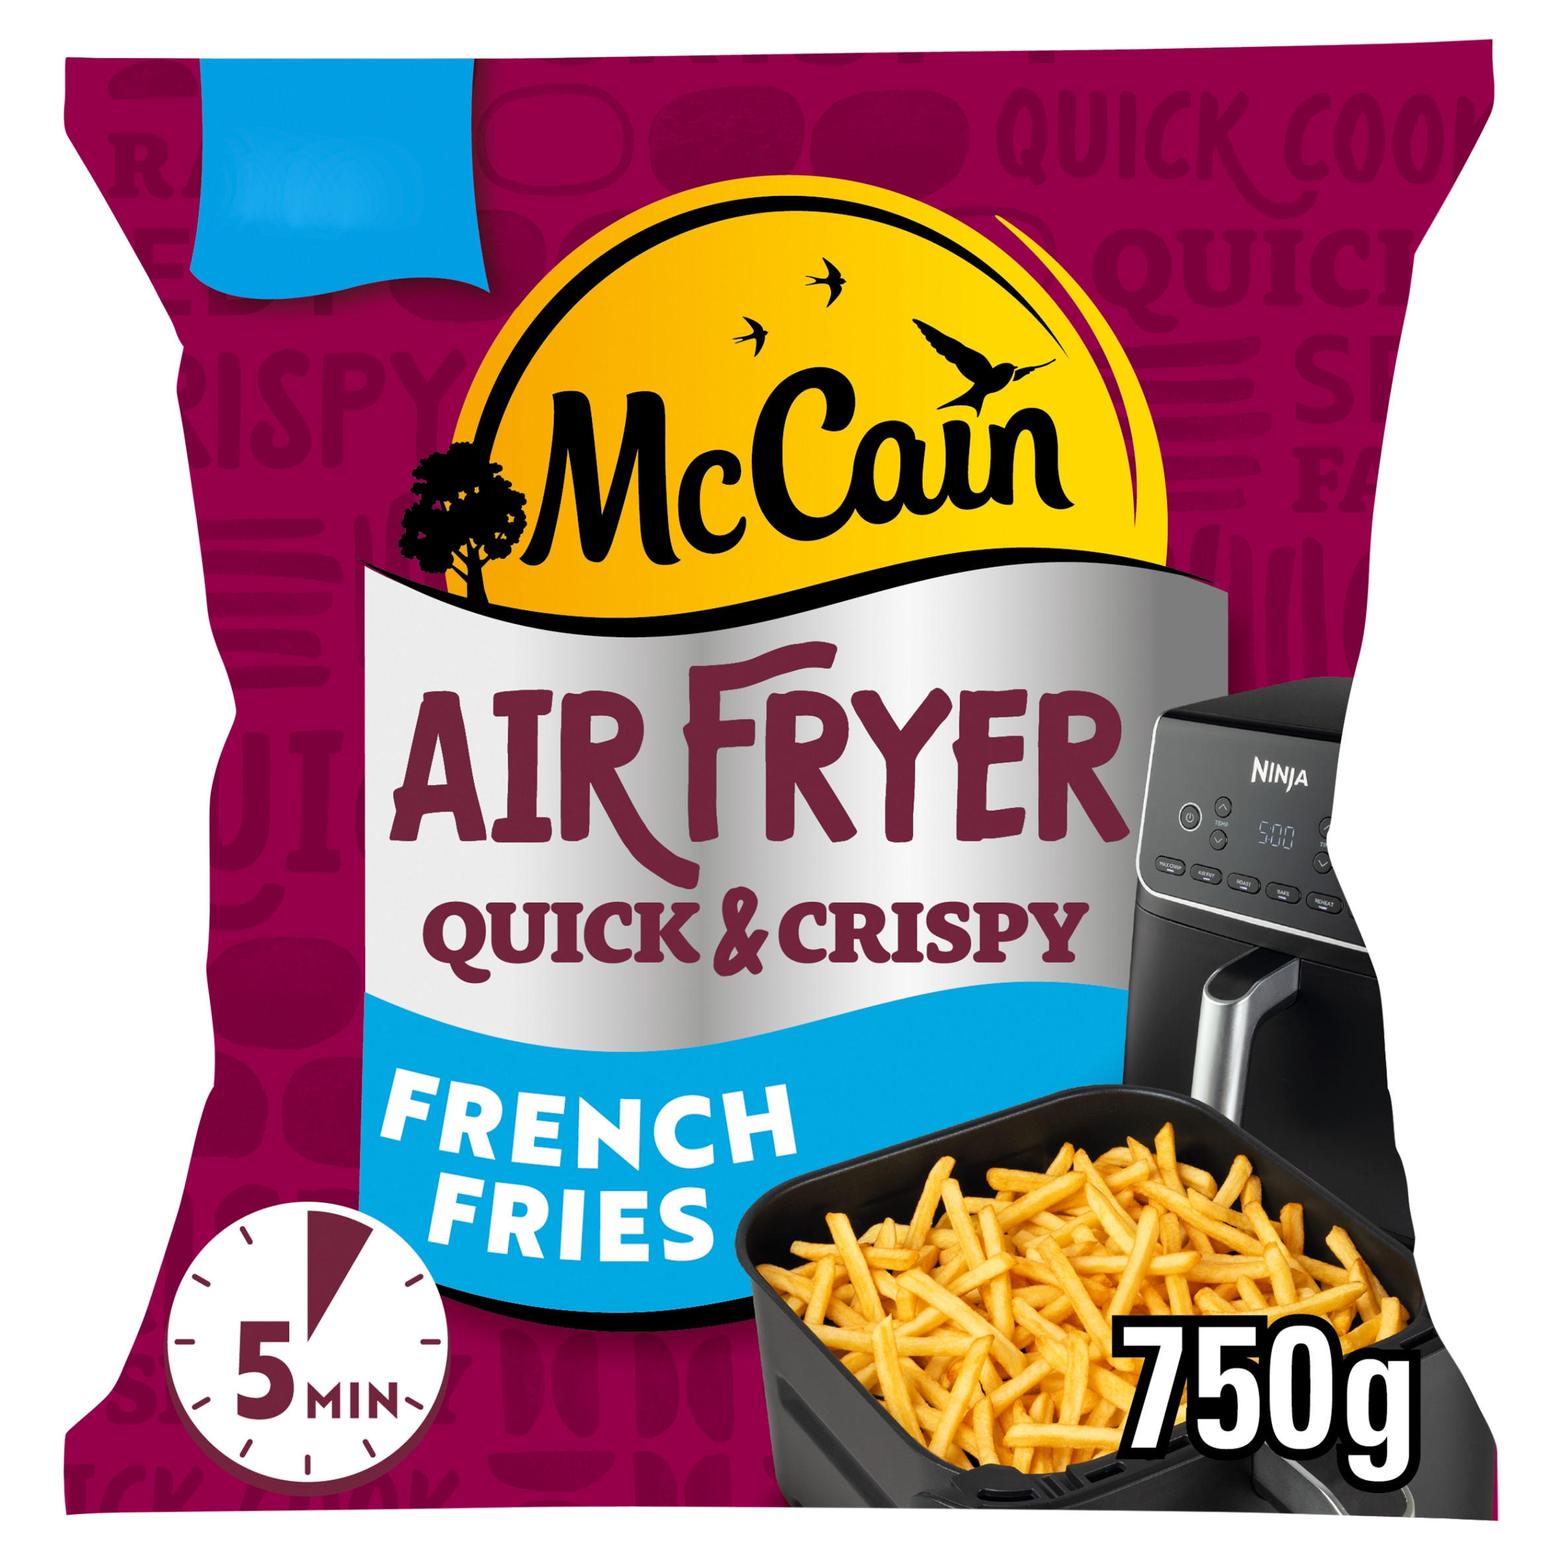 McCain Air Fryer Quick & Crispy French Fries 750g offers at £3.75 in Iceland